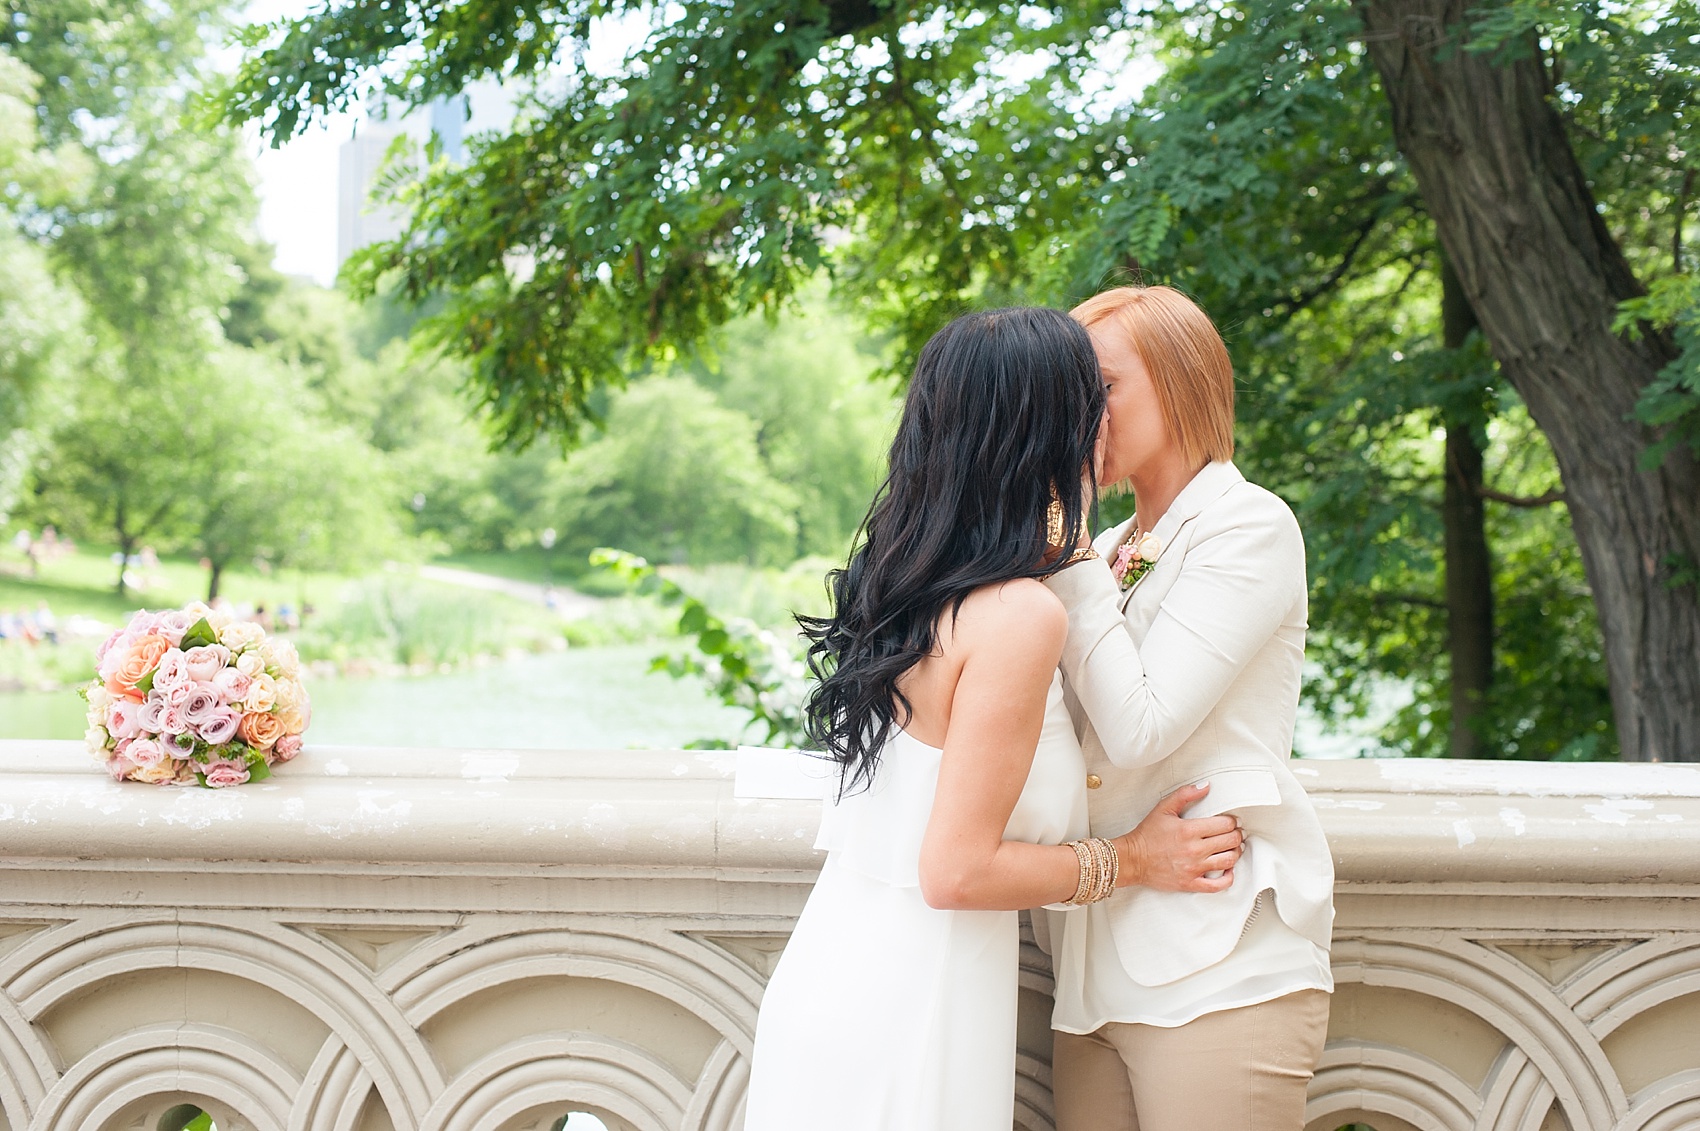 Central Park same sex elopement. Wedding photos by Mikkel Paige Photography. #nyc #centralparkelopement #samesexmarriage #equality #gayrights #equalrights #nycweddingphotographer #bowbridge